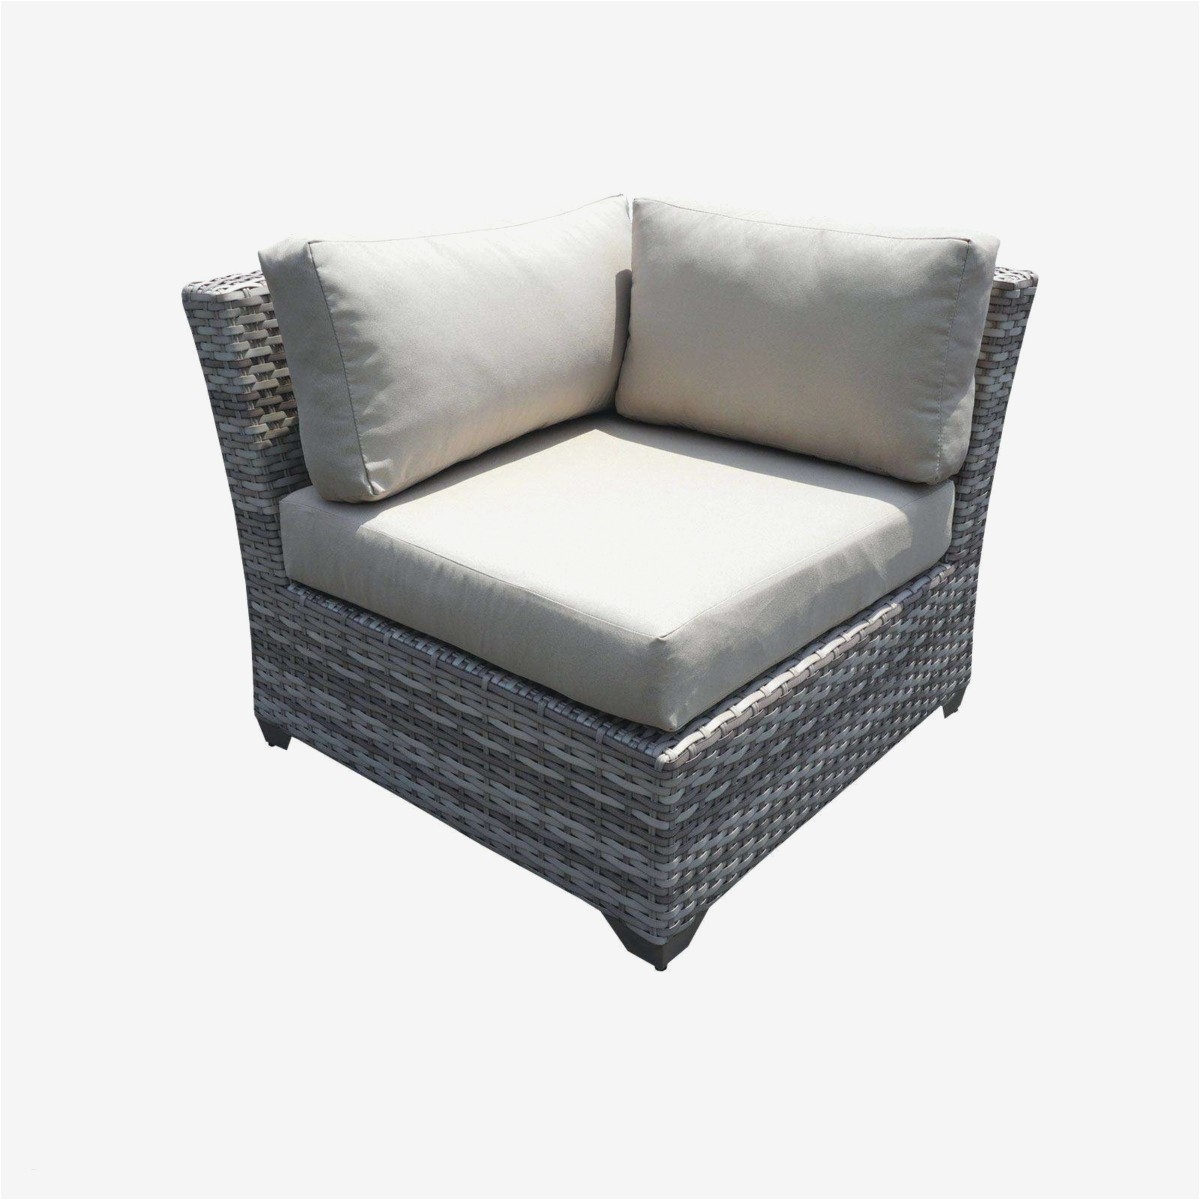 outdoor restaurant chairs photo armless outdoor dining chairs inspirational wicker outdoor sofa 0d picture